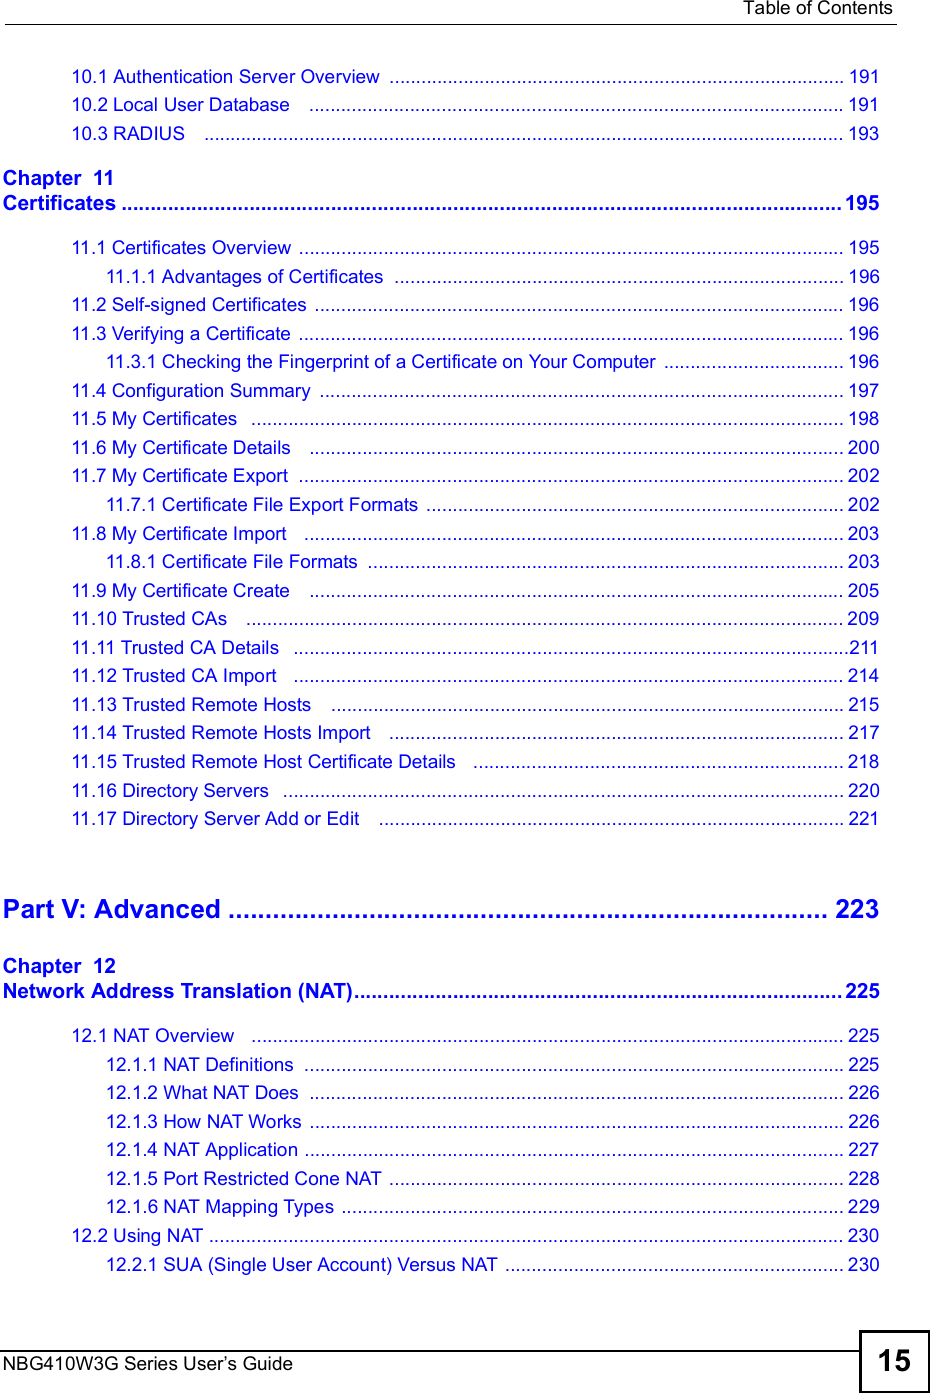  Table of ContentsNBG410W3G Series User s Guide 1510.1 Authentication Server Overview ......................................................................................19110.2 Local User Database   .....................................................................................................19110.3 RADIUS   .........................................................................................................................193Chapter  11Certificates............................................................................................................................19511.1 Certificates Overview .......................................................................................................19511.1.1 Advantages of Certificates .....................................................................................19611.2 Self-signed Certificates ....................................................................................................19611.3 Verifying a Certificate .......................................................................................................19611.3.1 Checking the Fingerprint of a Certificate on Your Computer ..................................19611.4 Configuration Summary ...................................................................................................19711.5 My Certificates  ................................................................................................................19811.6 My Certificate Details   .....................................................................................................20011.7 My Certificate Export  .......................................................................................................20211.7.1 Certificate File Export Formats ...............................................................................20211.8 My Certificate Import   ......................................................................................................20311.8.1 Certificate File Formats ..........................................................................................20311.9 My Certificate Create   .....................................................................................................20511.10 Trusted CAs   .................................................................................................................20911.11 Trusted CA Details  .........................................................................................................21111.12 Trusted CA Import   ........................................................................................................21411.13 Trusted Remote Hosts   .................................................................................................21511.14 Trusted Remote Hosts Import   ......................................................................................21711.15 Trusted Remote Host Certificate Details   ......................................................................21811.16 Directory Servers  ..........................................................................................................22011.17 Directory Server Add or Edit   ........................................................................................221Part V: Advanced.................................................................................223Chapter  12Network Address Translation (NAT)....................................................................................22512.1 NAT Overview   ................................................................................................................22512.1.1 NAT Definitions ......................................................................................................22512.1.2 What NAT Does .....................................................................................................22612.1.3 How NAT Works .....................................................................................................22612.1.4 NAT Application ......................................................................................................22712.1.5 Port Restricted Cone NAT ......................................................................................22812.1.6 NAT Mapping Types ...............................................................................................22912.2 Using NAT ........................................................................................................................23012.2.1 SUA (Single User Account) Versus NAT ................................................................230